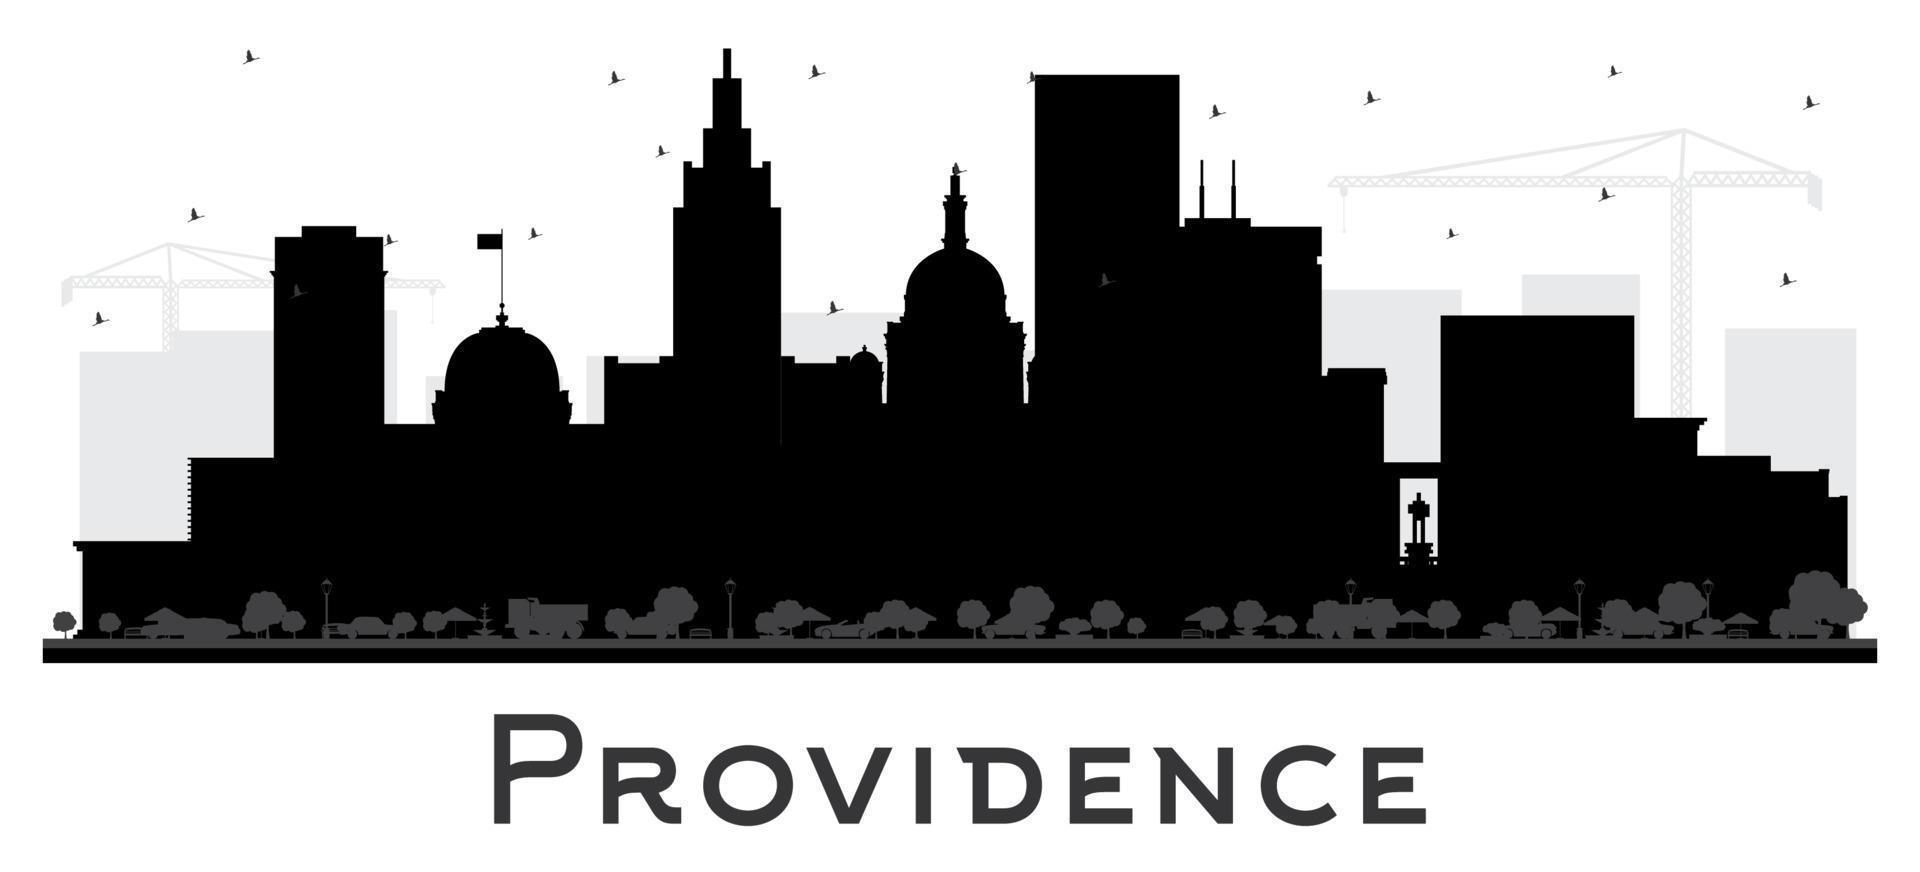 Providence Rhode Island City Skyline Silhouette with Black Buildings Isolated on White. vector